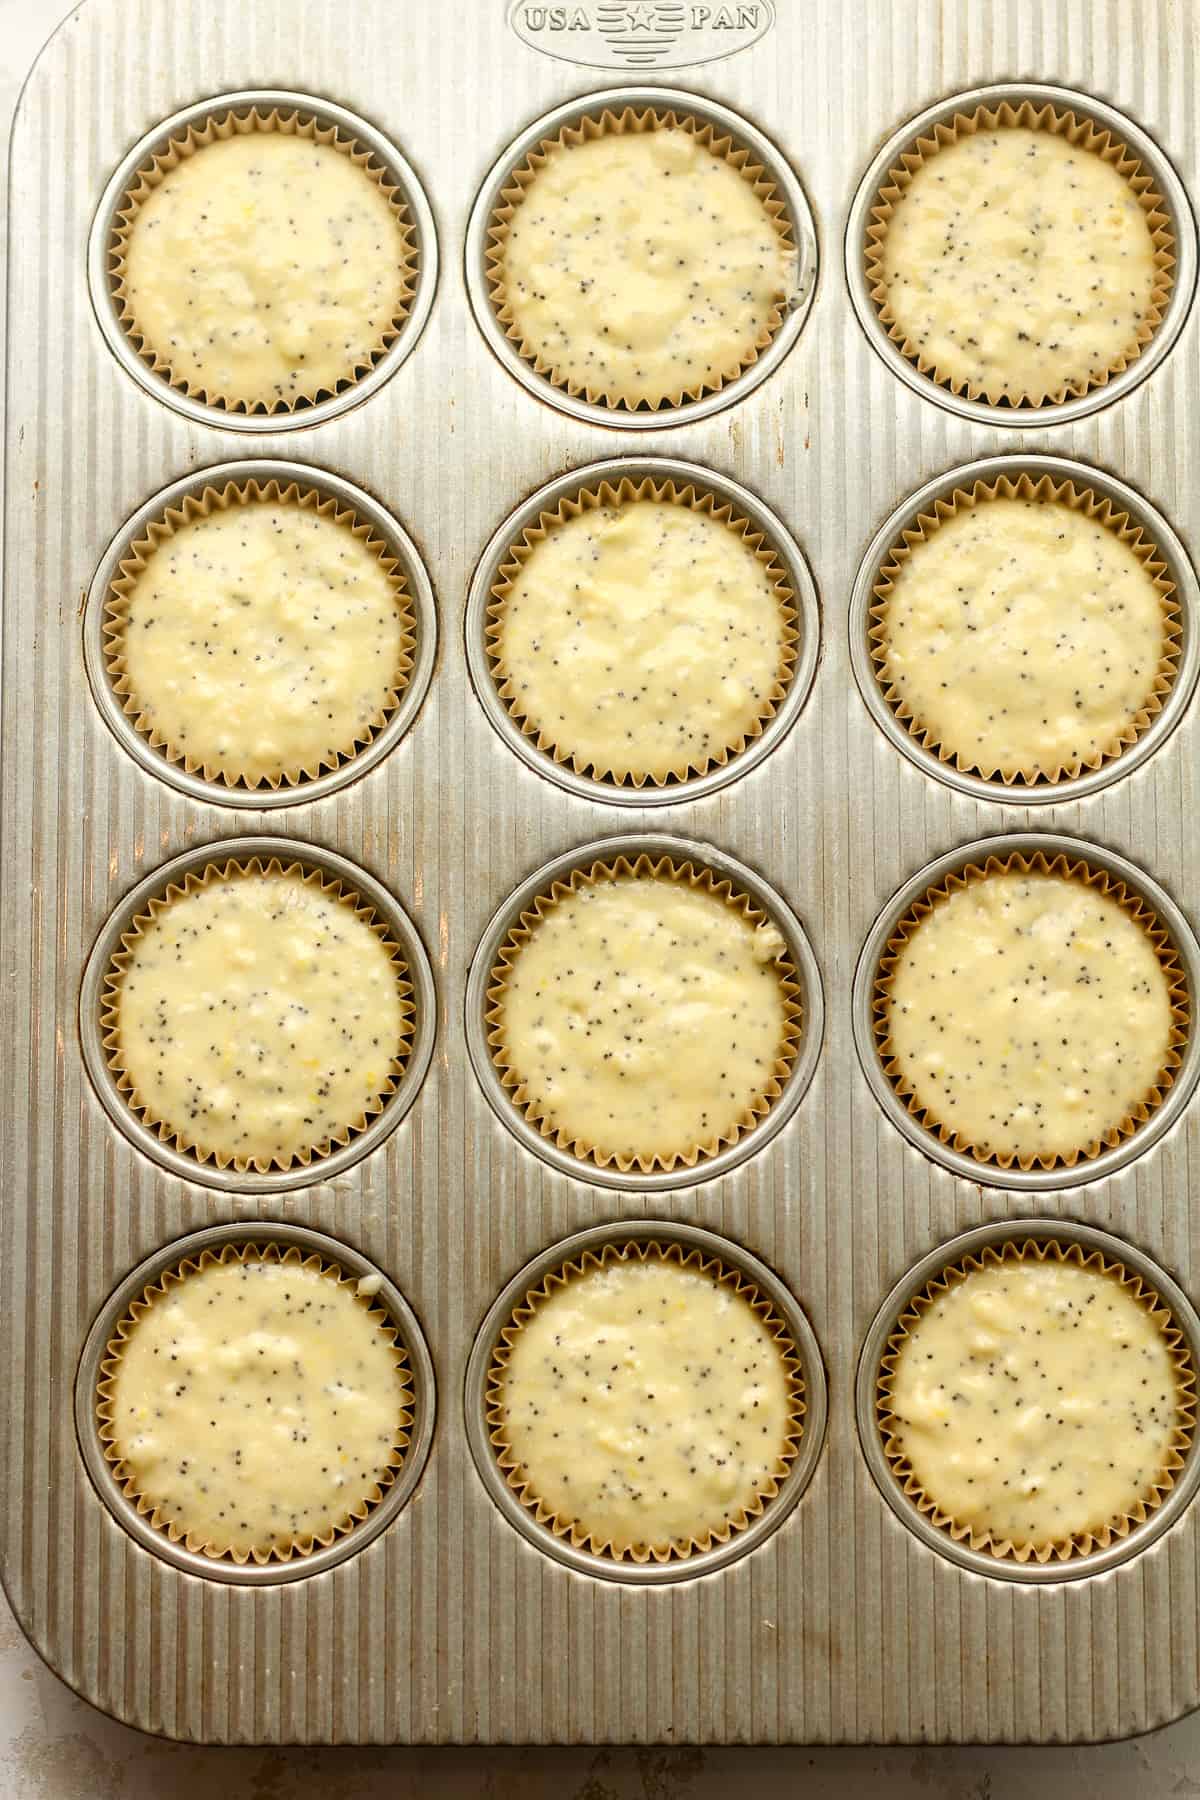 The muffin tin with the liners filled with batter.